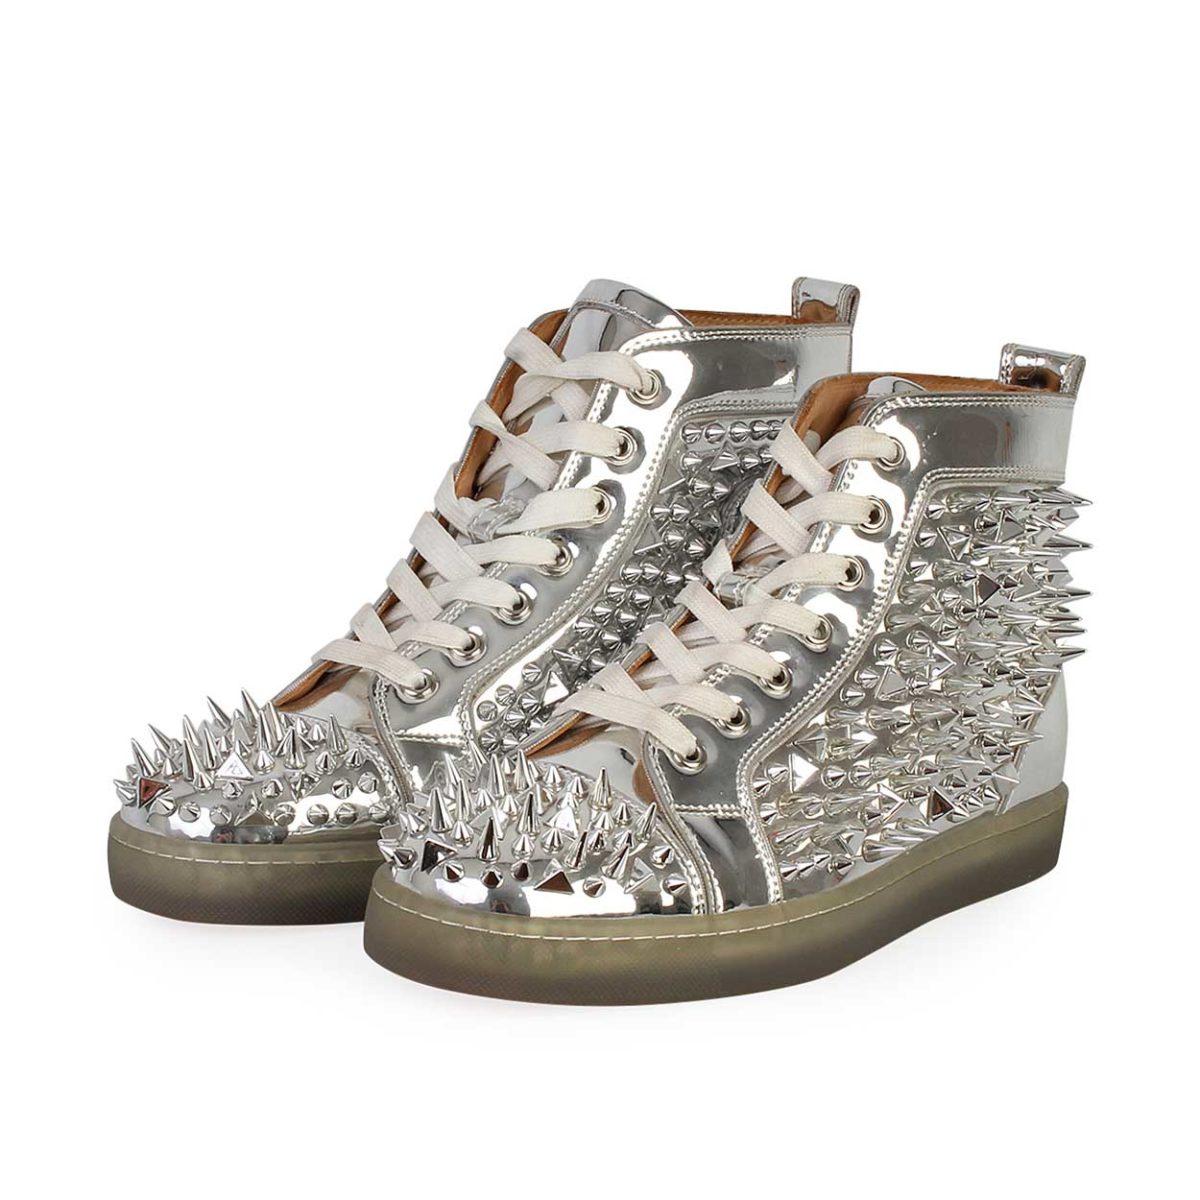 silver spiked louboutins